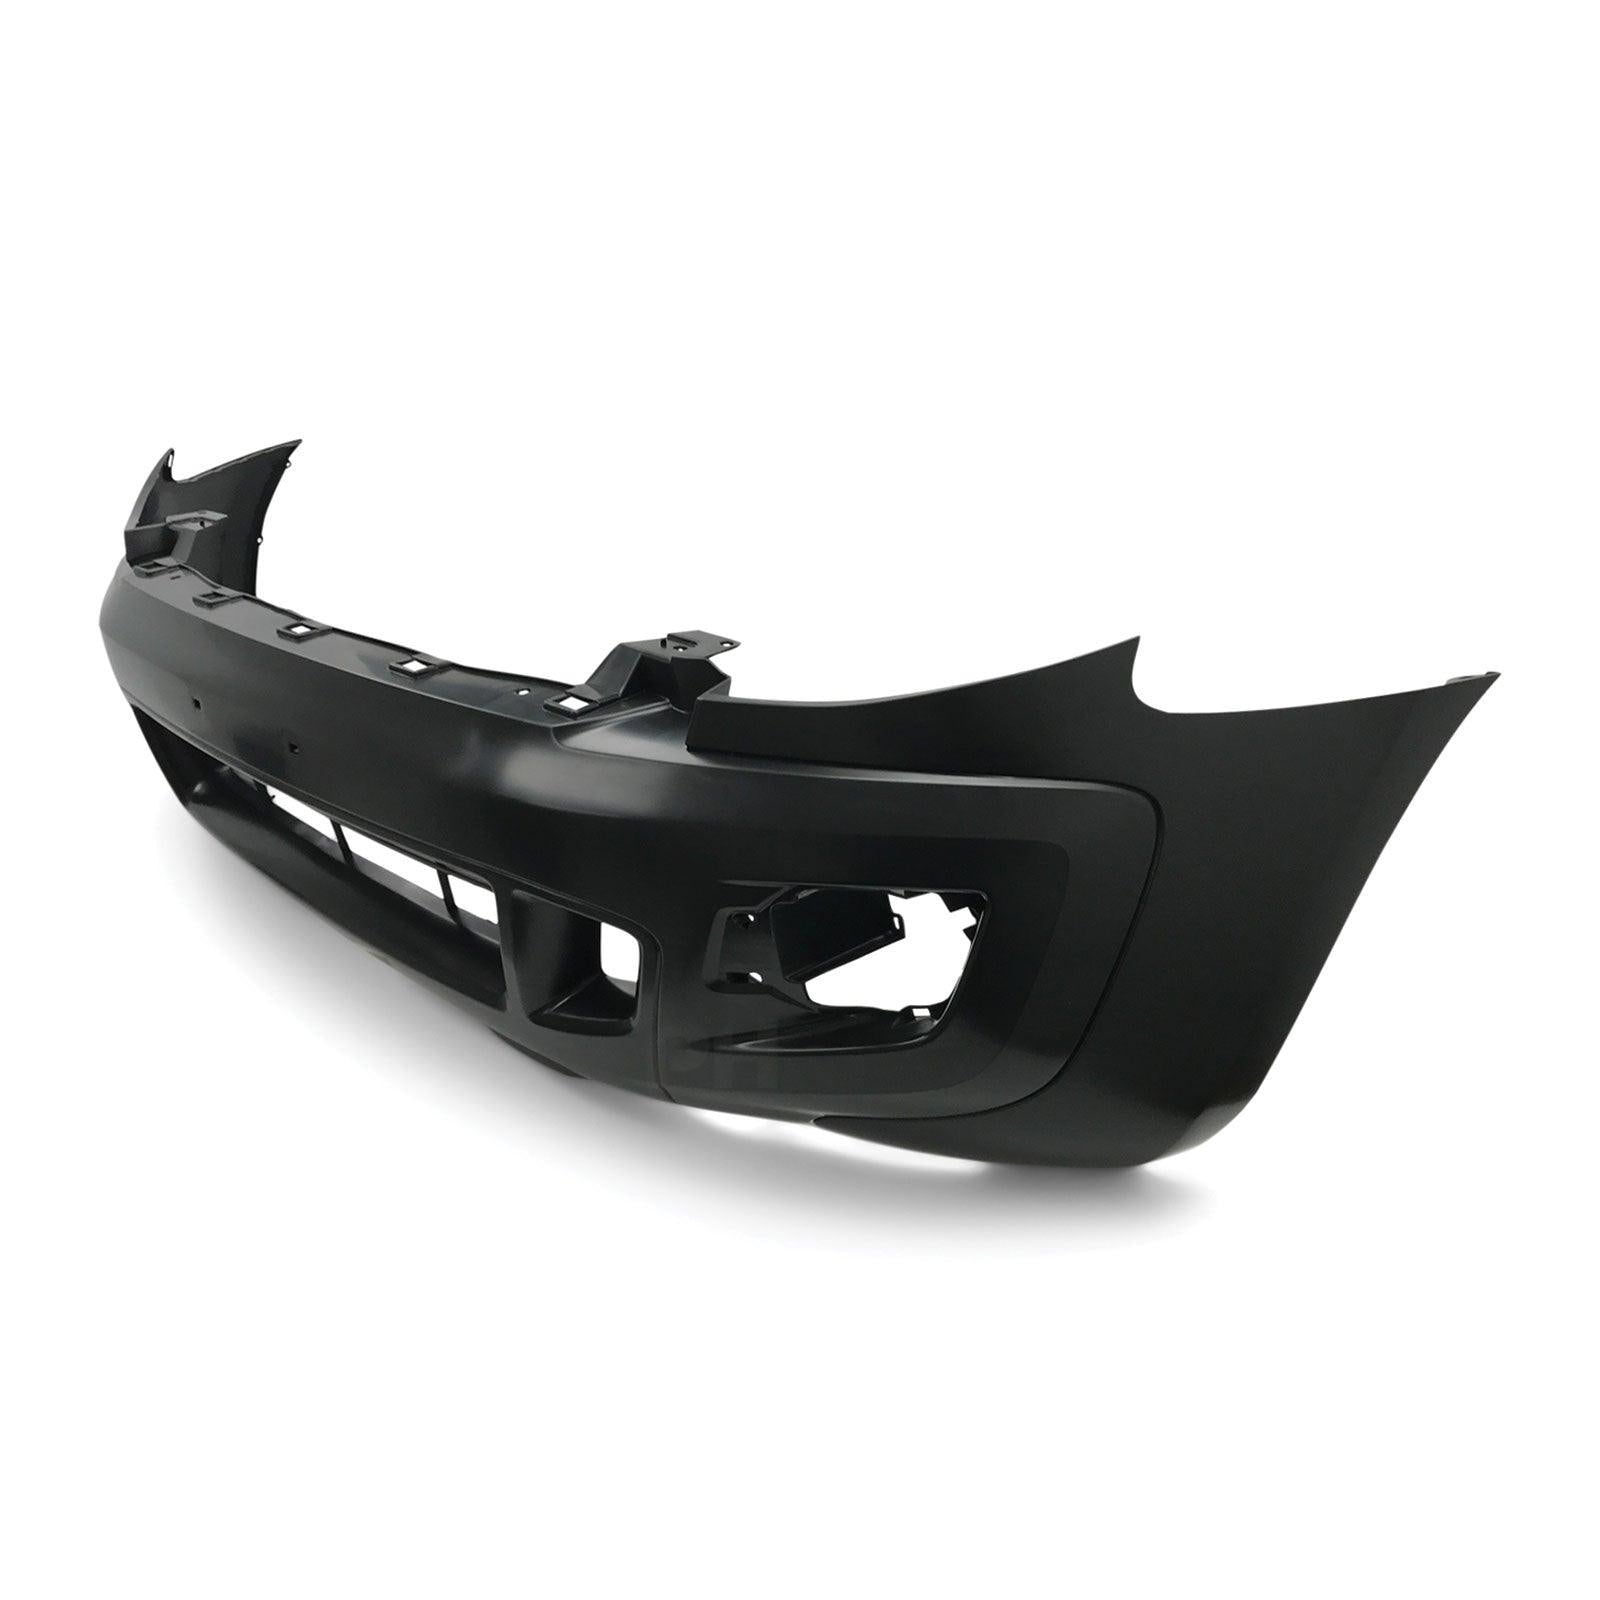 Front Bumper Fits Ford Ranger PX MK1 2011 - 2015 2WD 4WD - 4X4OC™